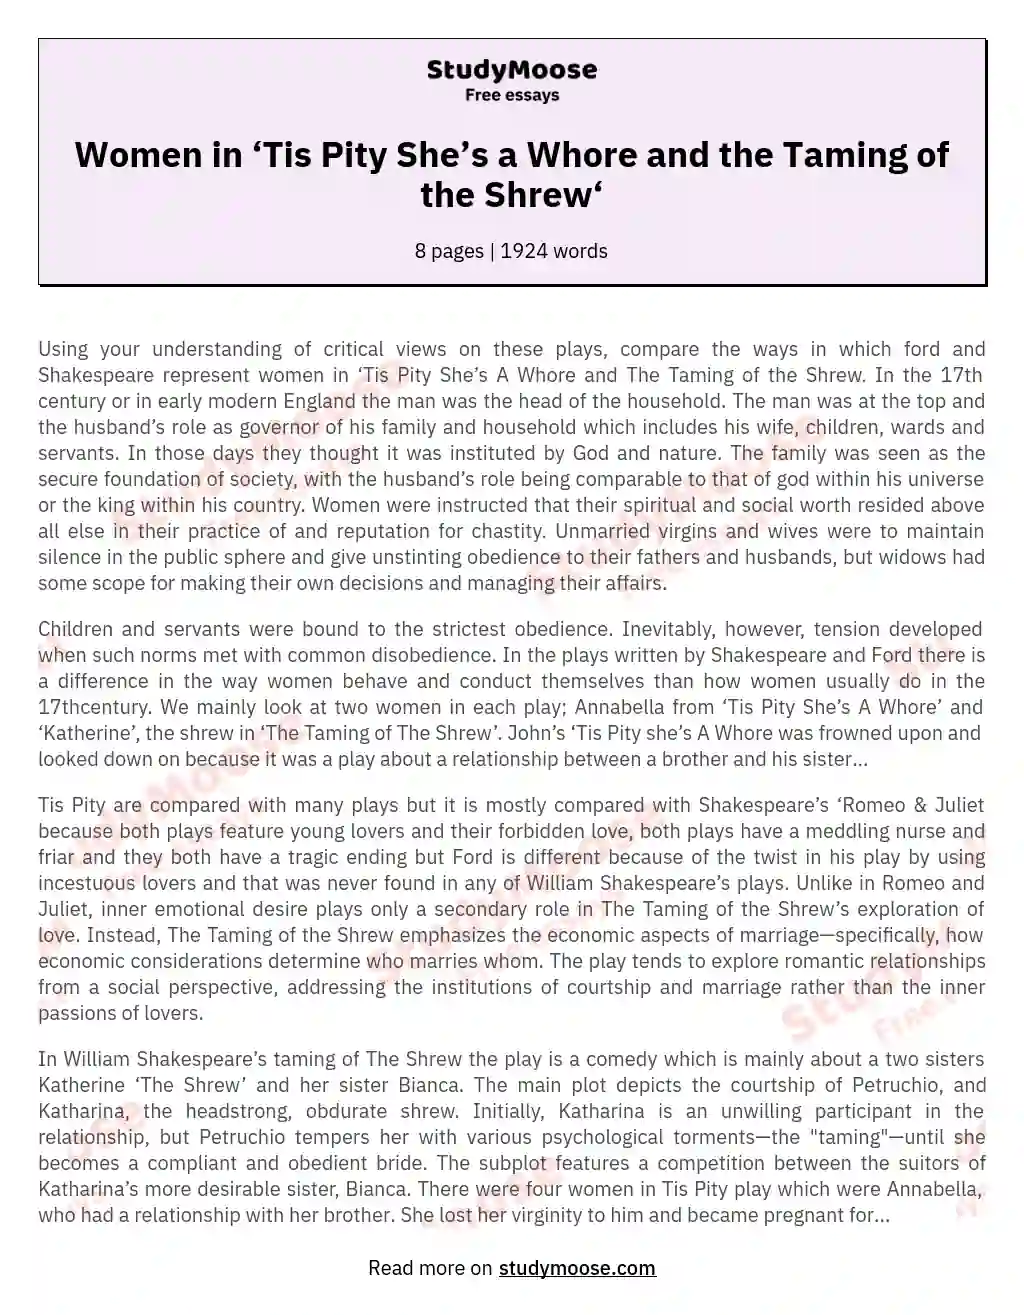 Women in ‘Tis Pity She’s a Whore and the Taming of the Shrew‘